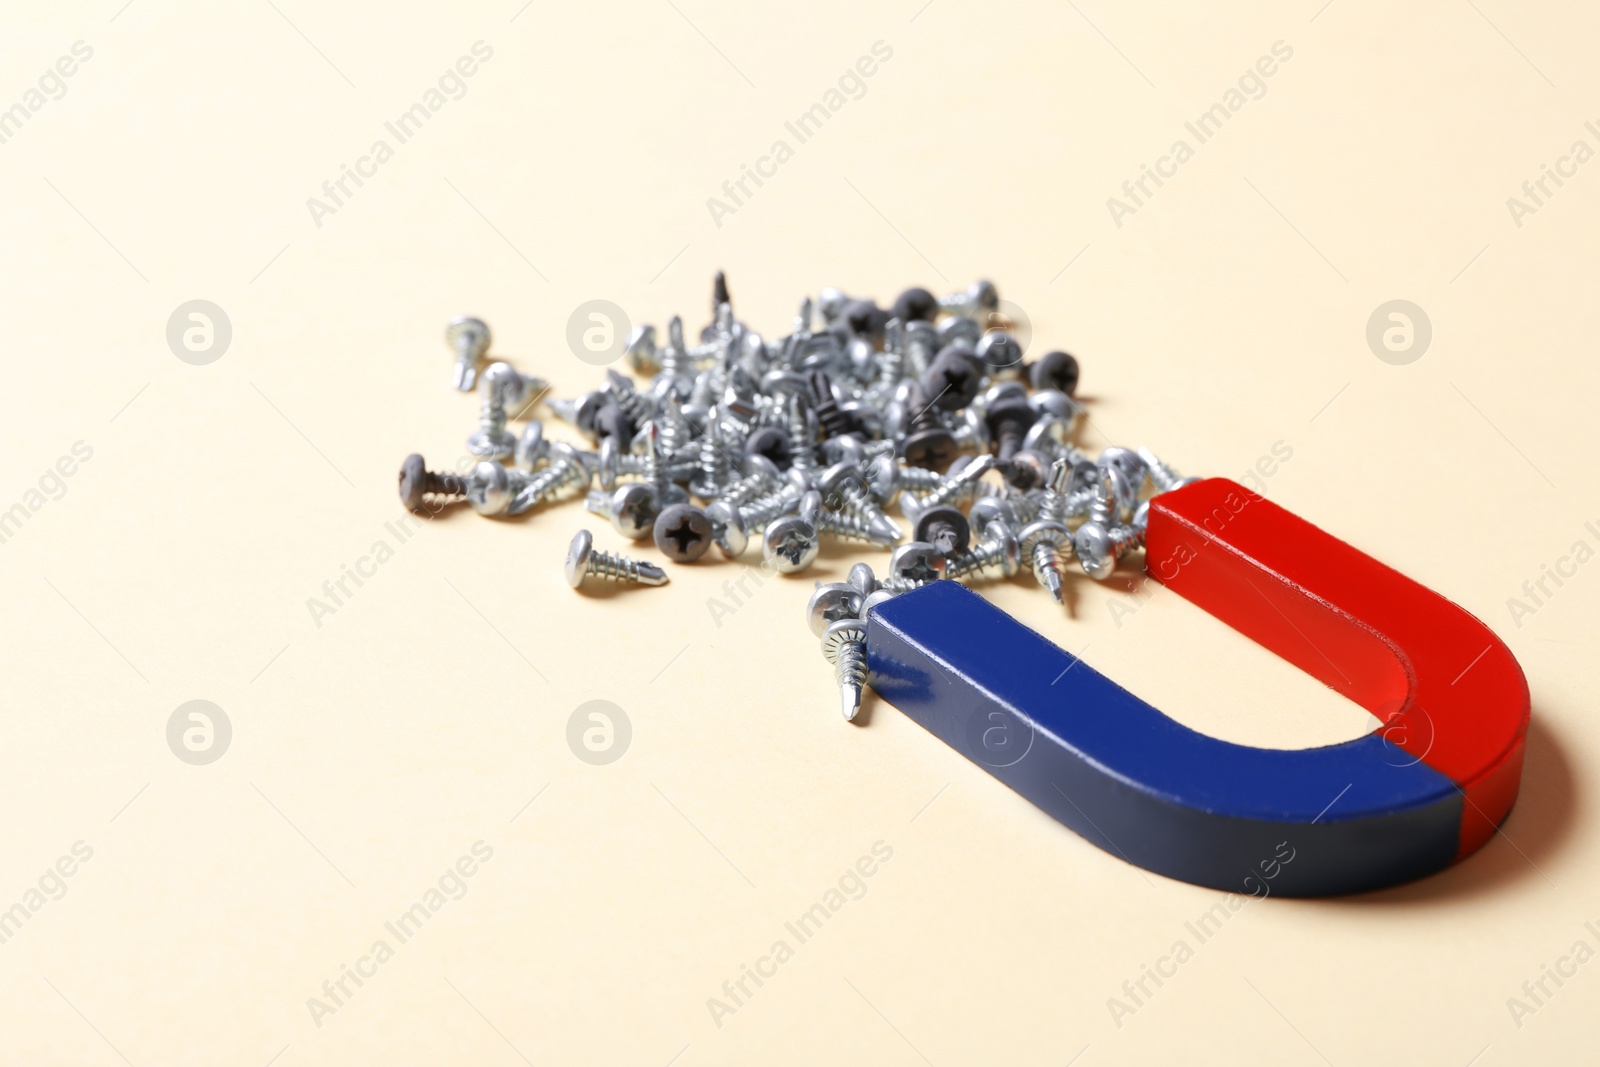 Photo of Red and blue horseshoe magnet attracting screws on beige background